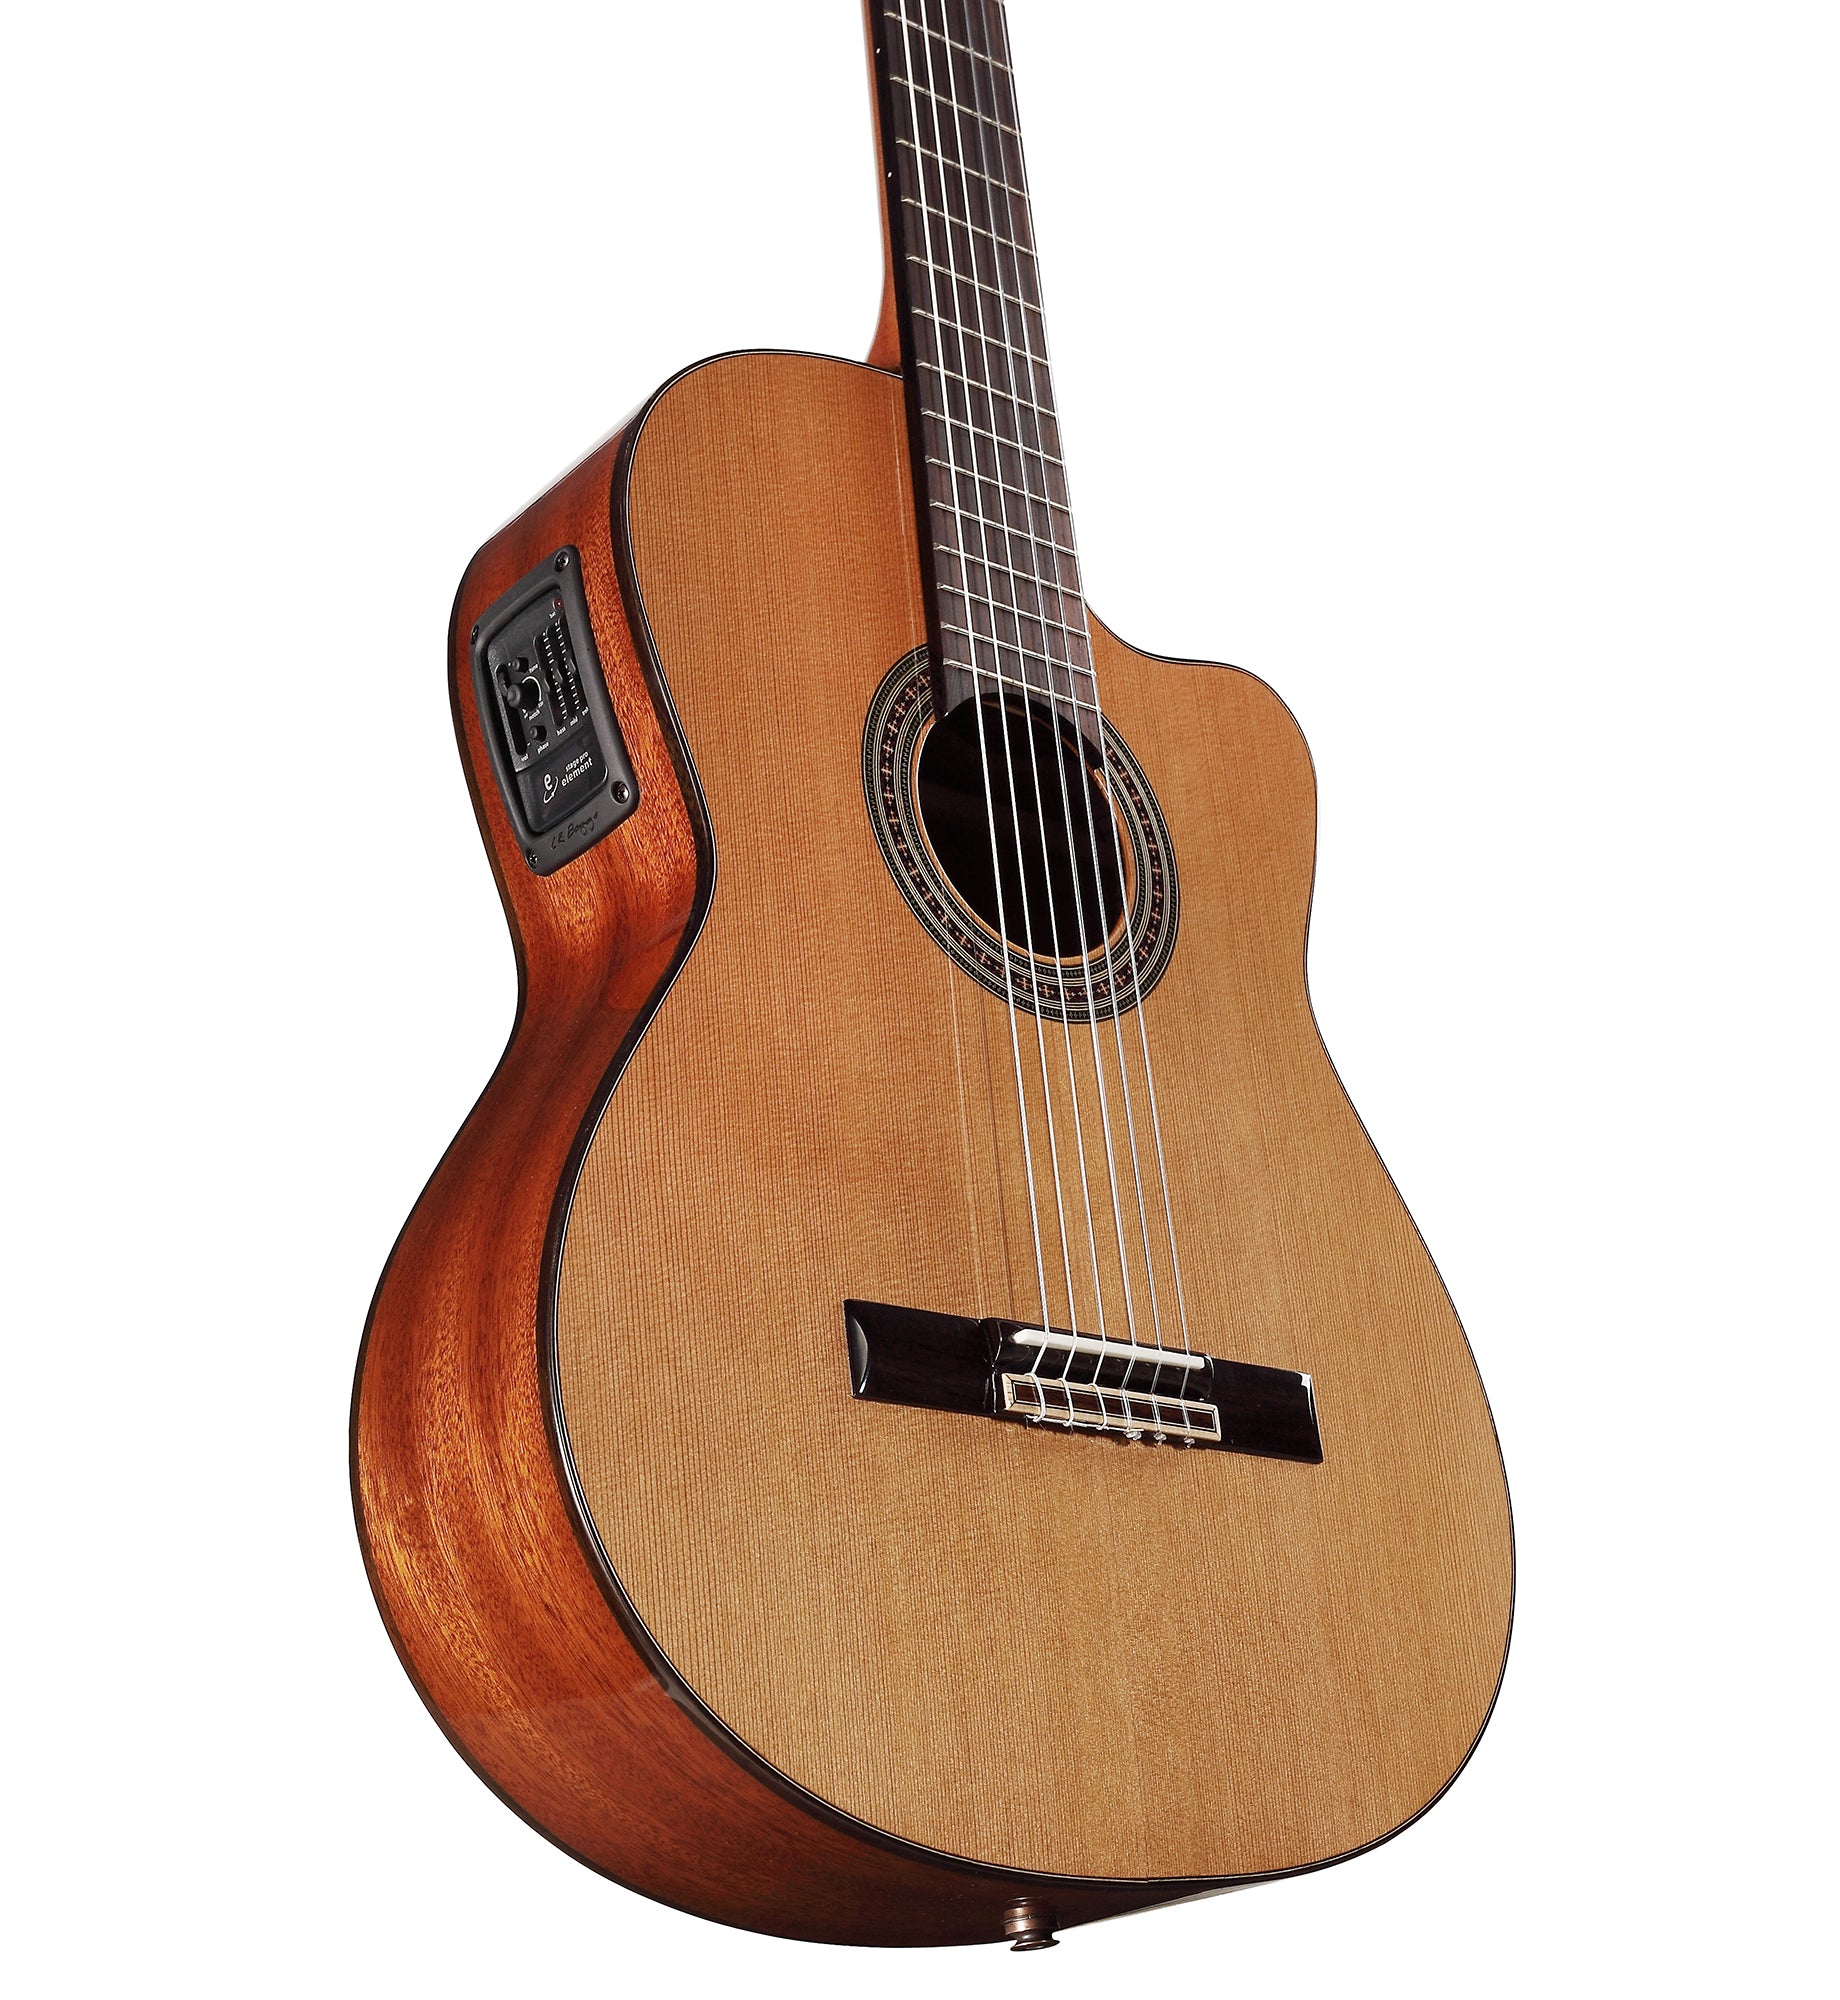 ALVAREZ ARTIST AC65HCE ARTIST 65 SERIES CLASSICAL HYBRID ELECTRIC IN NATURAL GLOSS FINISH - The Guitar World